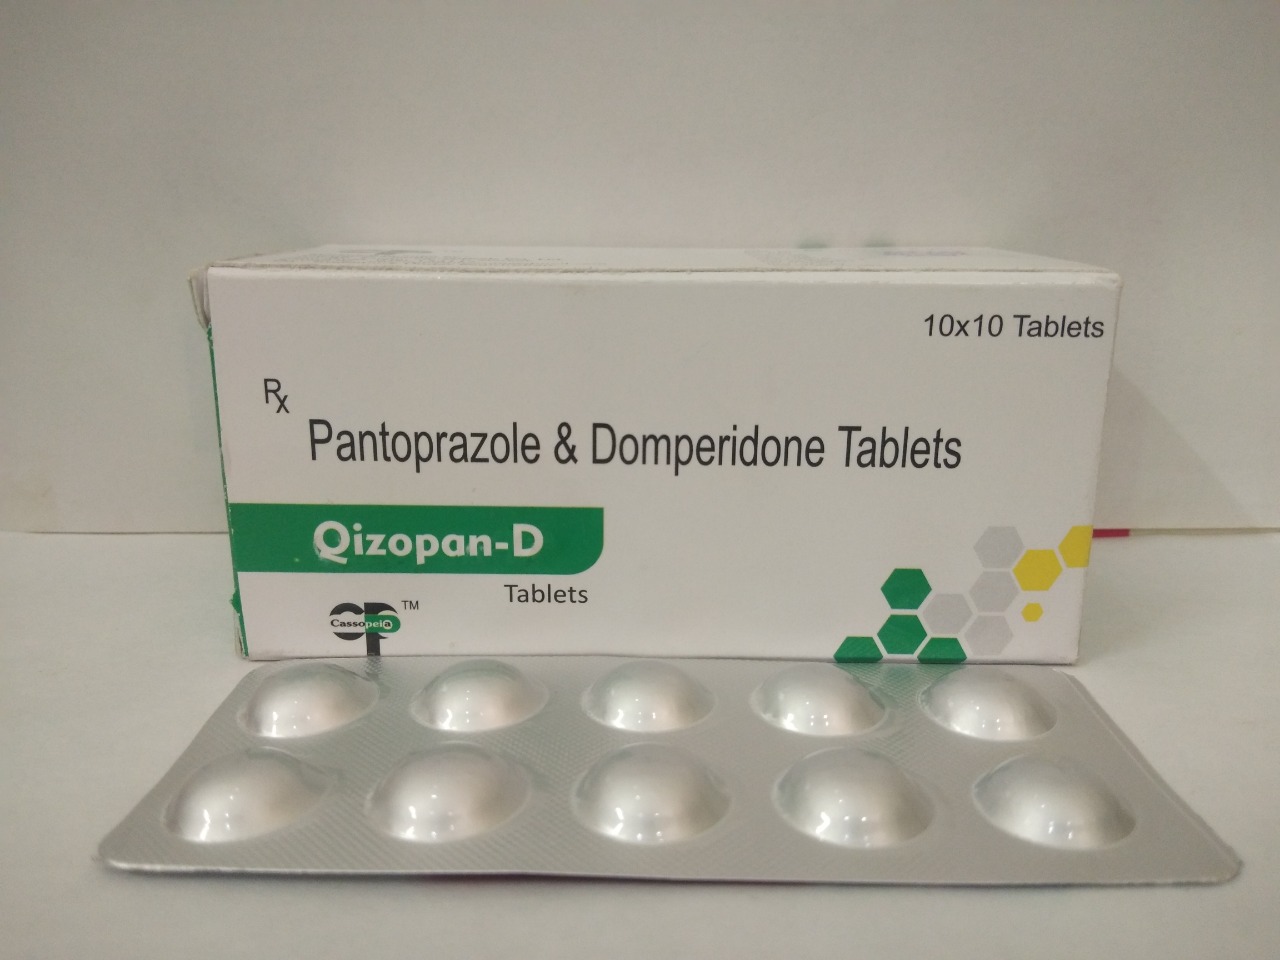 Product Name: Qizopan D, Compositions of Qizopan D are Pantoprazole & Domeperidone Tablets - Cassopeia Pharmaceutical Pvt Ltd